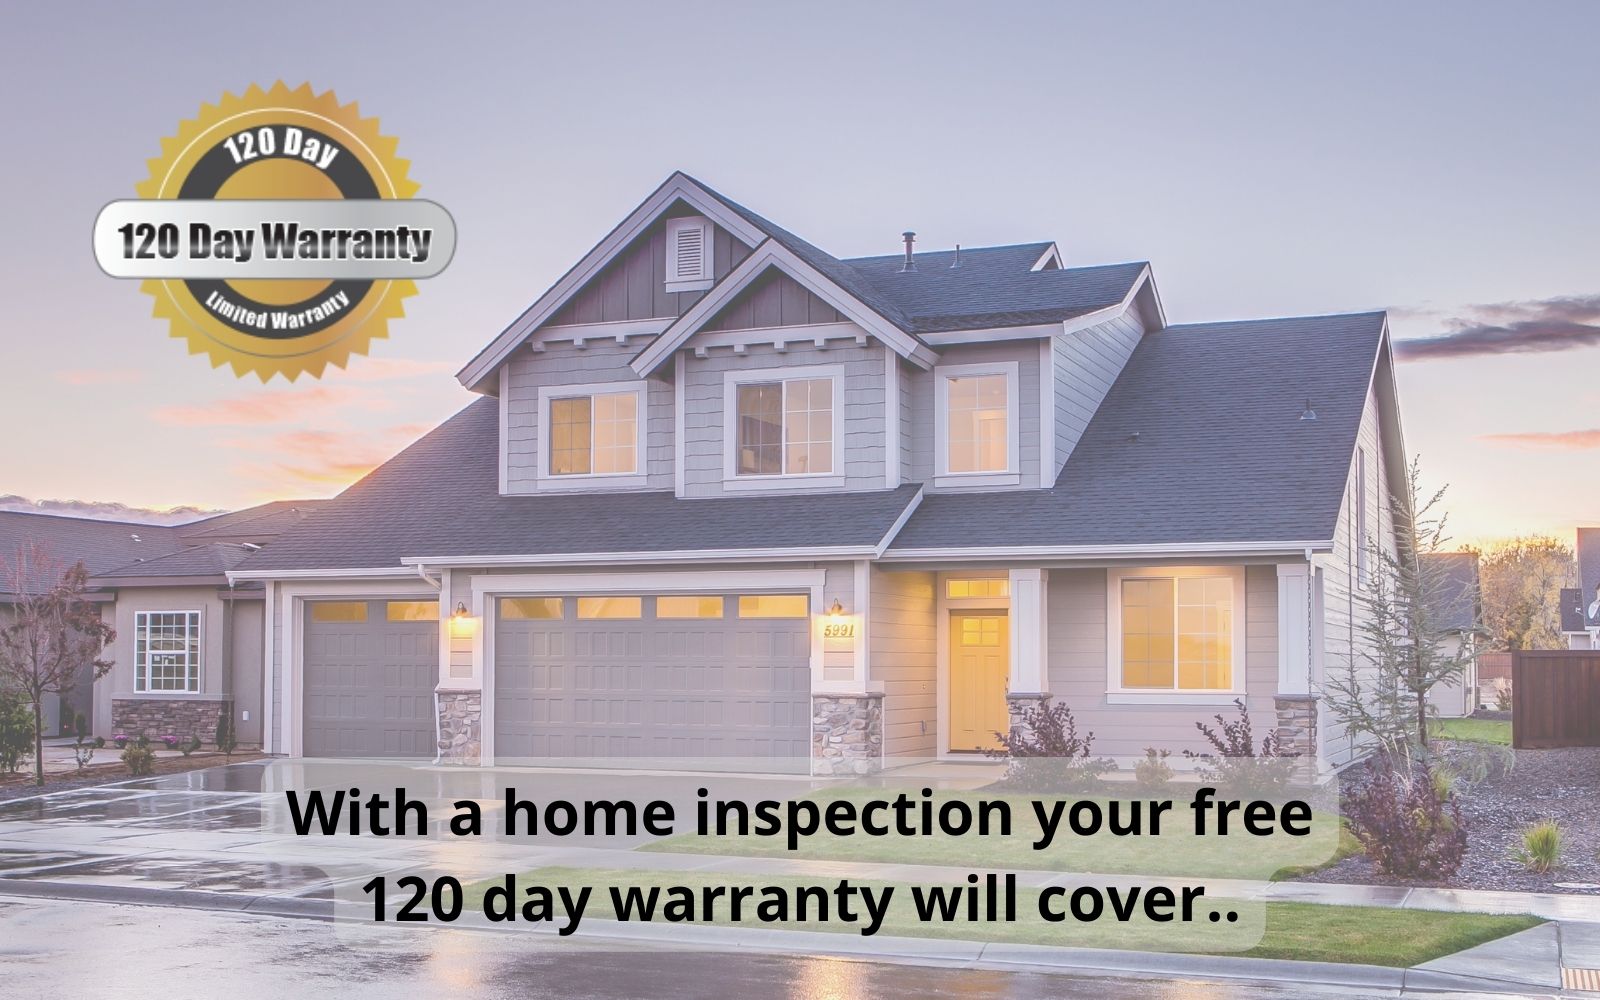 Warranty for Your Home